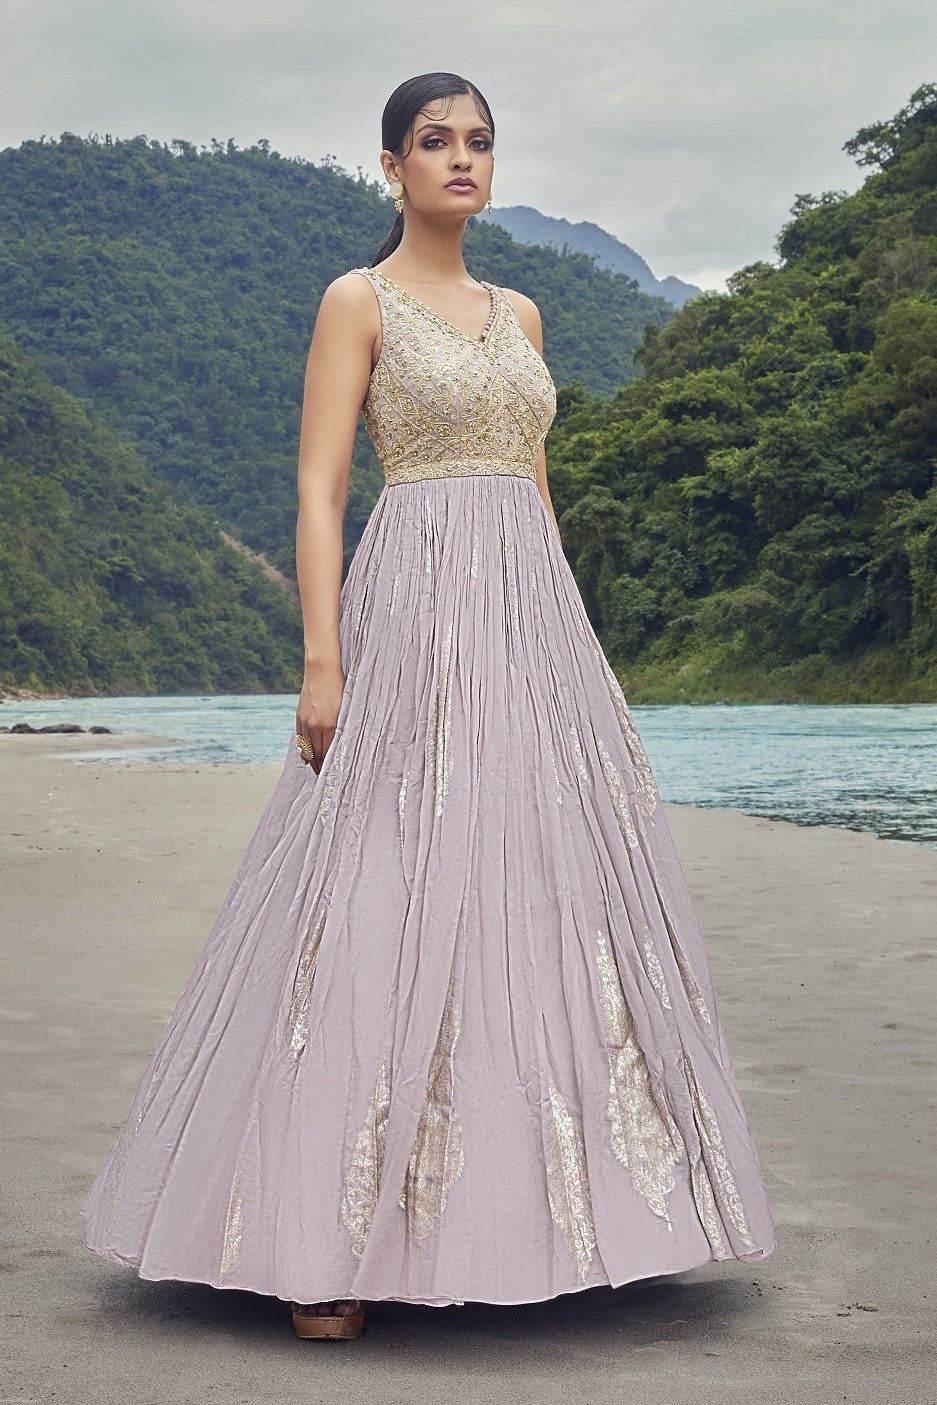 Ethnic Gowns | Beautiful Party Gown | Freeup